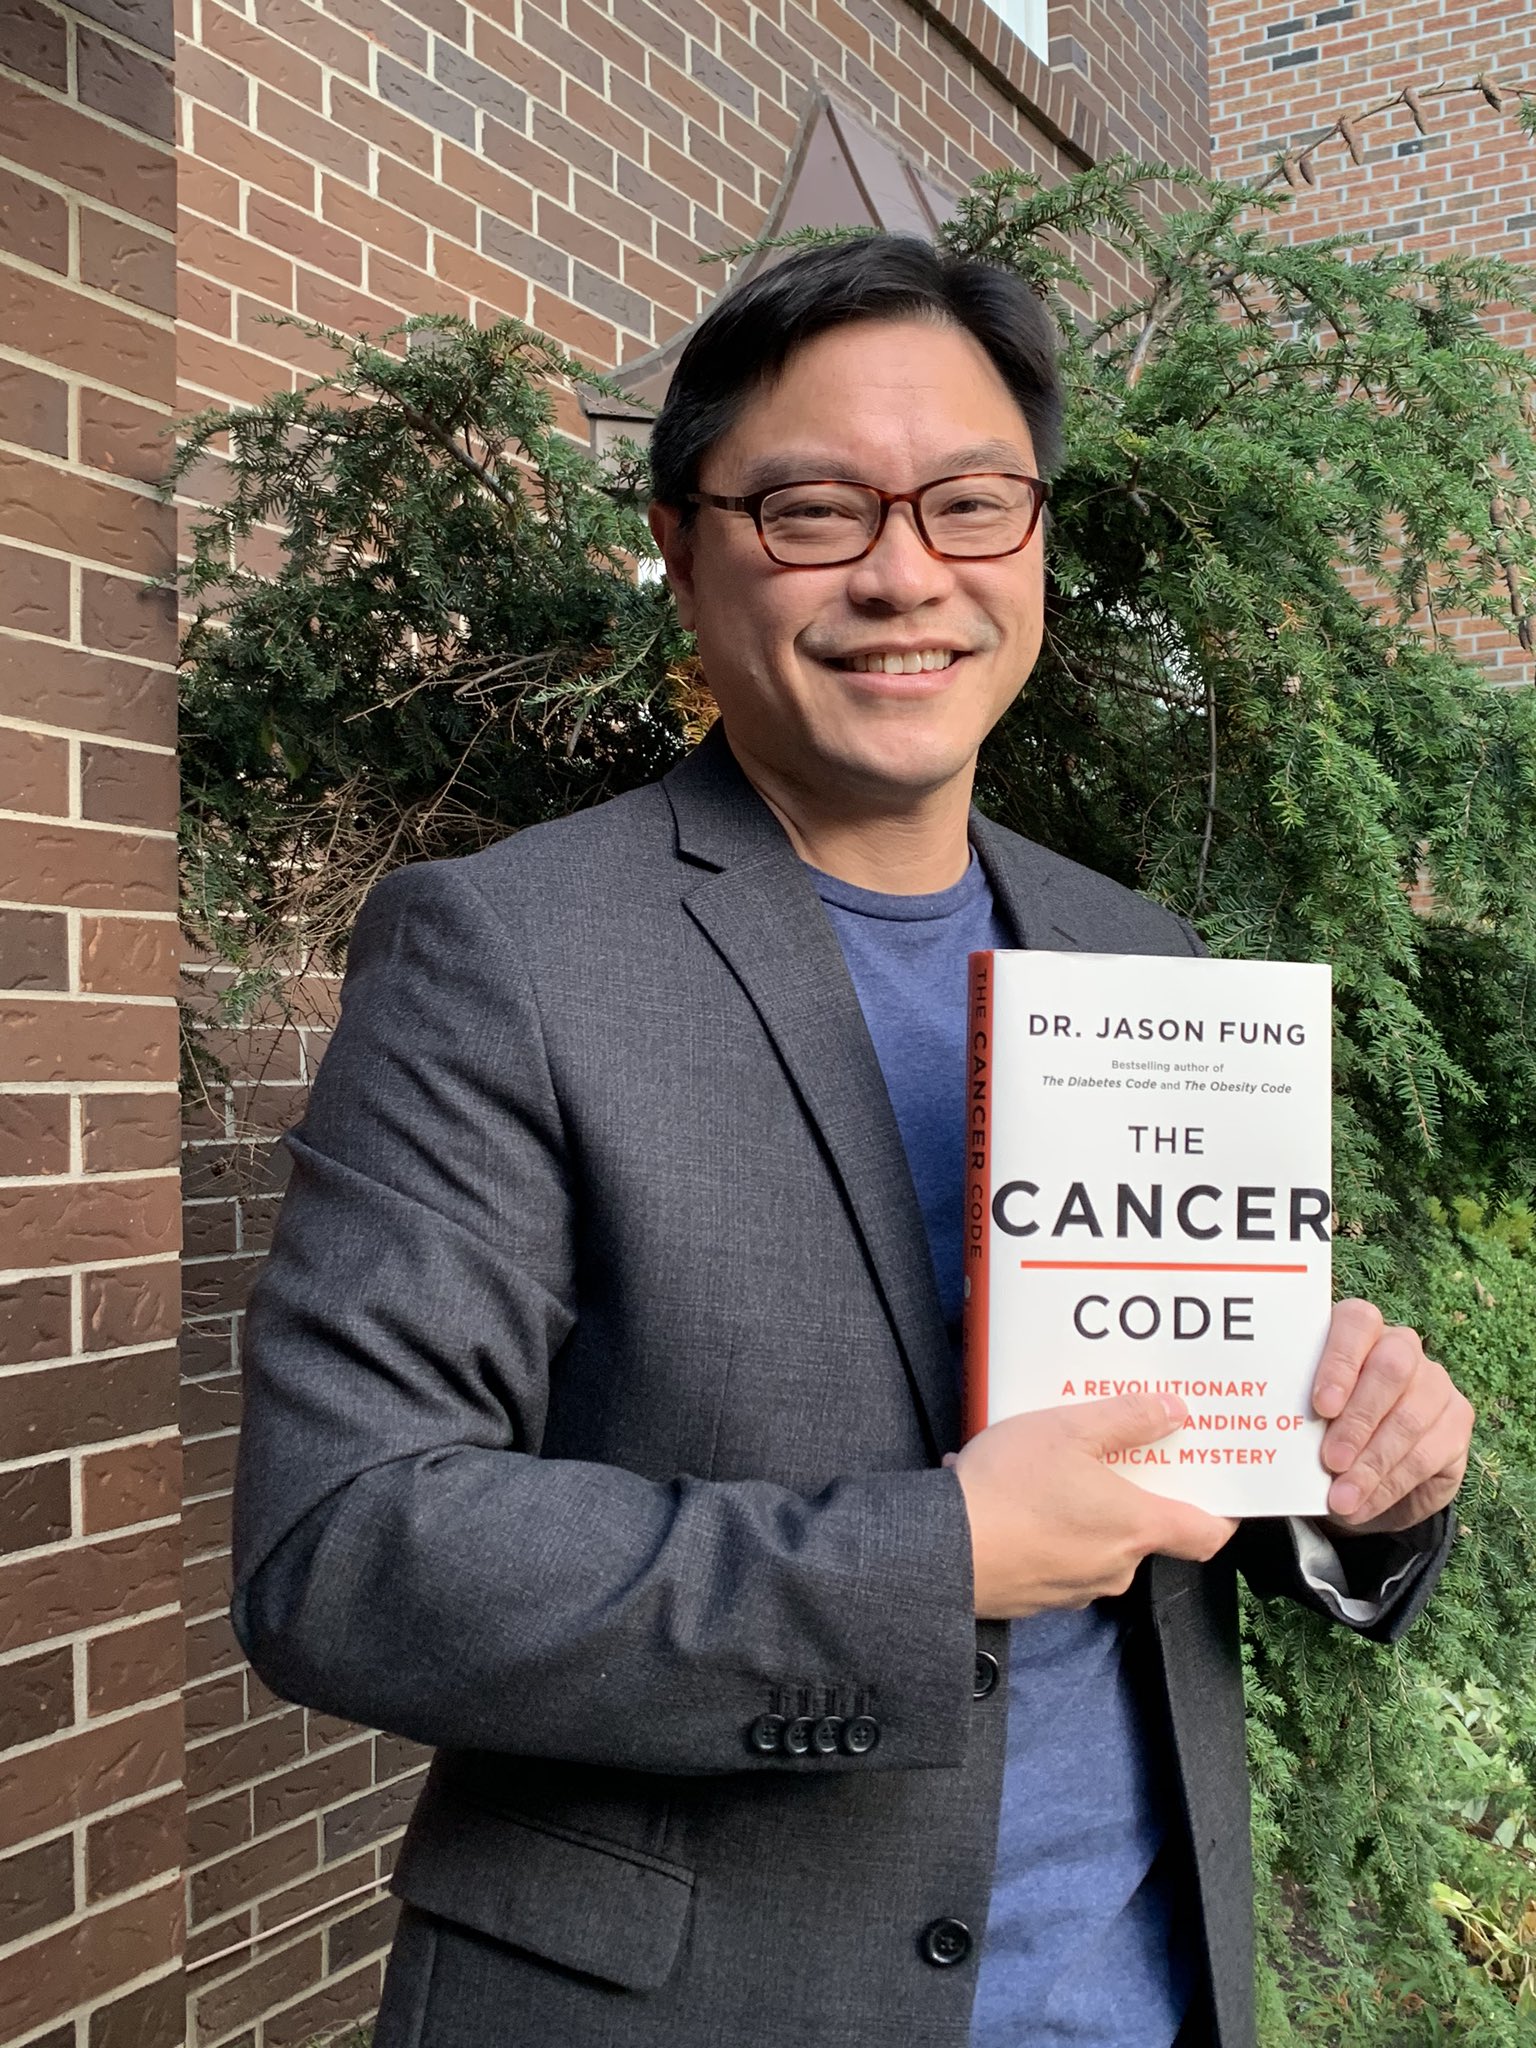 Dr. Jason Fung on X: The Cancer Code! Coming Nov 10. Really